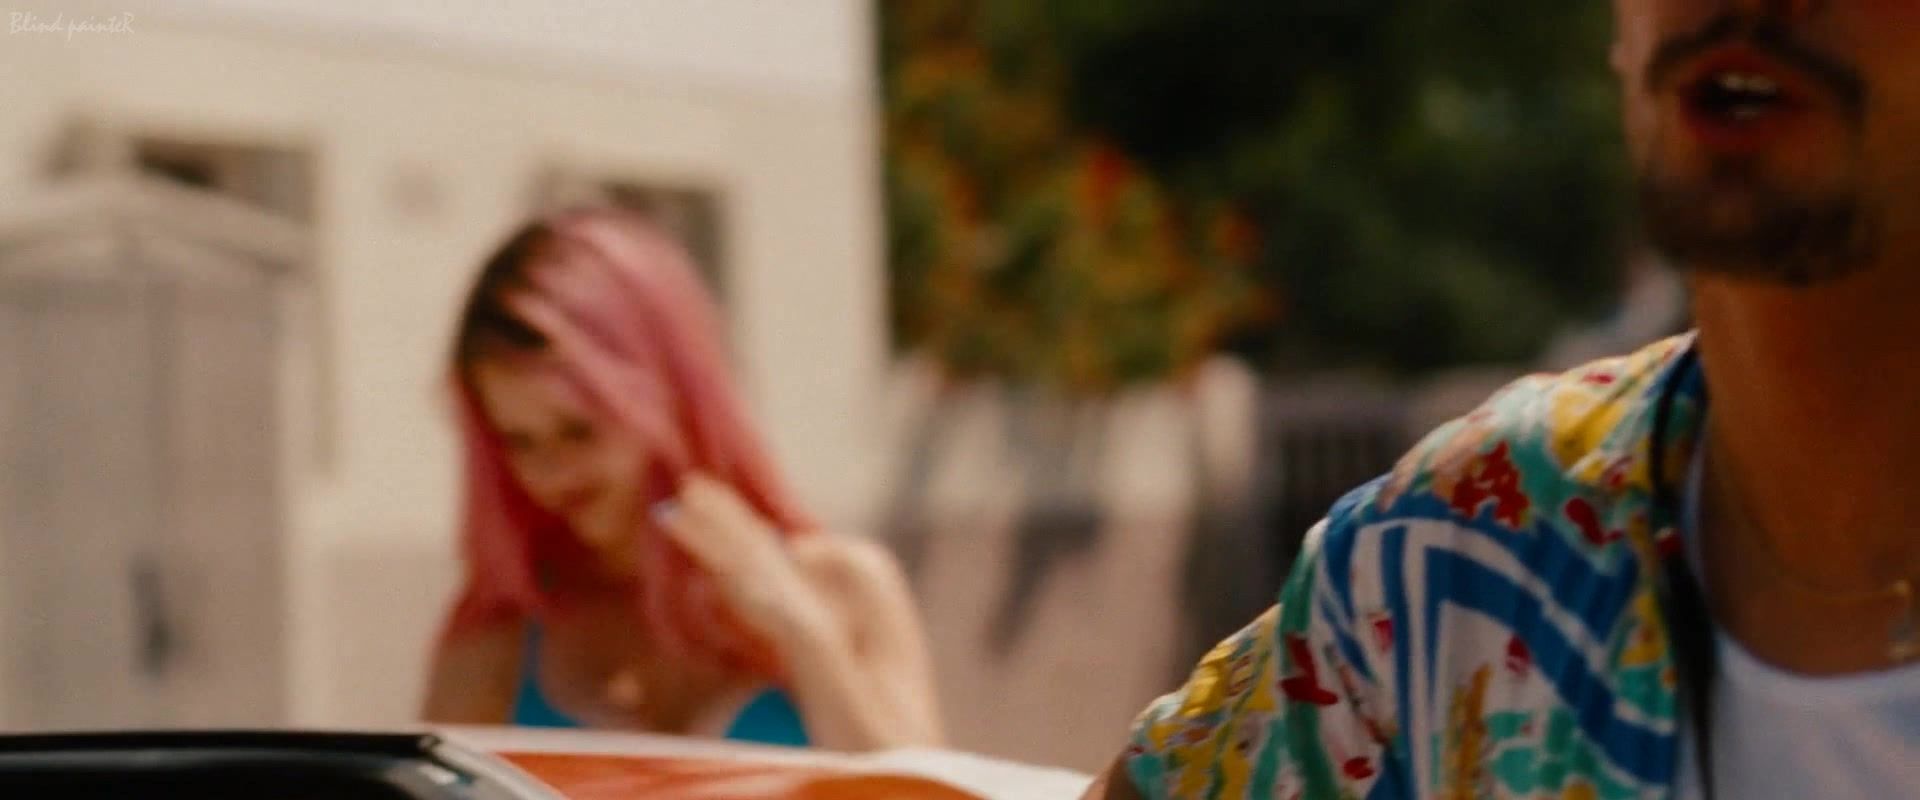 Deepthroat Selena Gomez nude in Spring Breakers (2013) Submission - 2